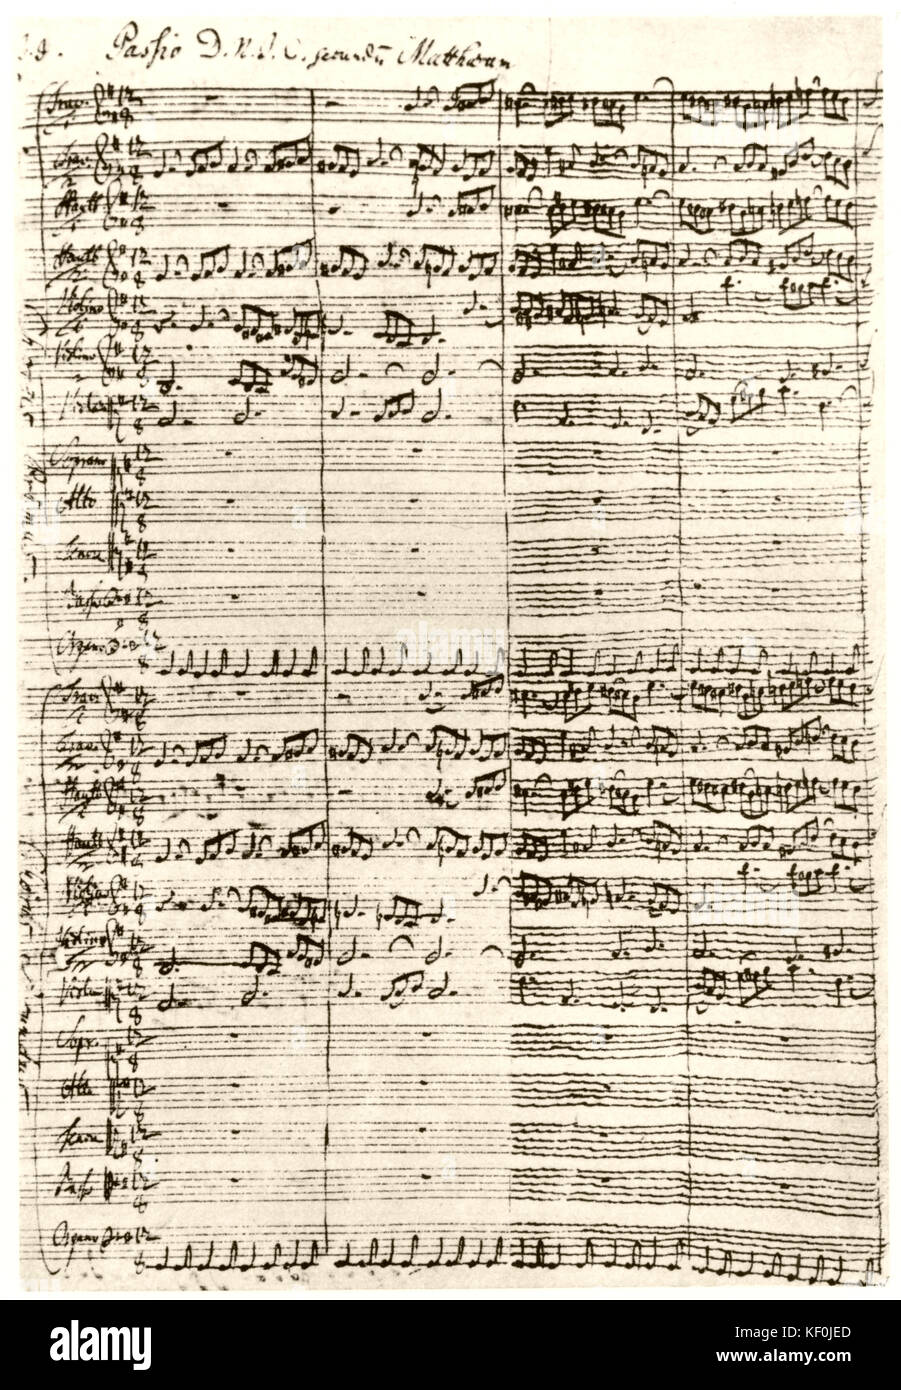 Johann Sebastian Bach - the German composer 's handwritten score for his composition 'Matthäuspassion' (St. Matthew Passion or The Passion According to St. Matthew). Composed for the Thomaskirche, 1729. JSB: 21 March 1685 - 28 July 1750. Stock Photo